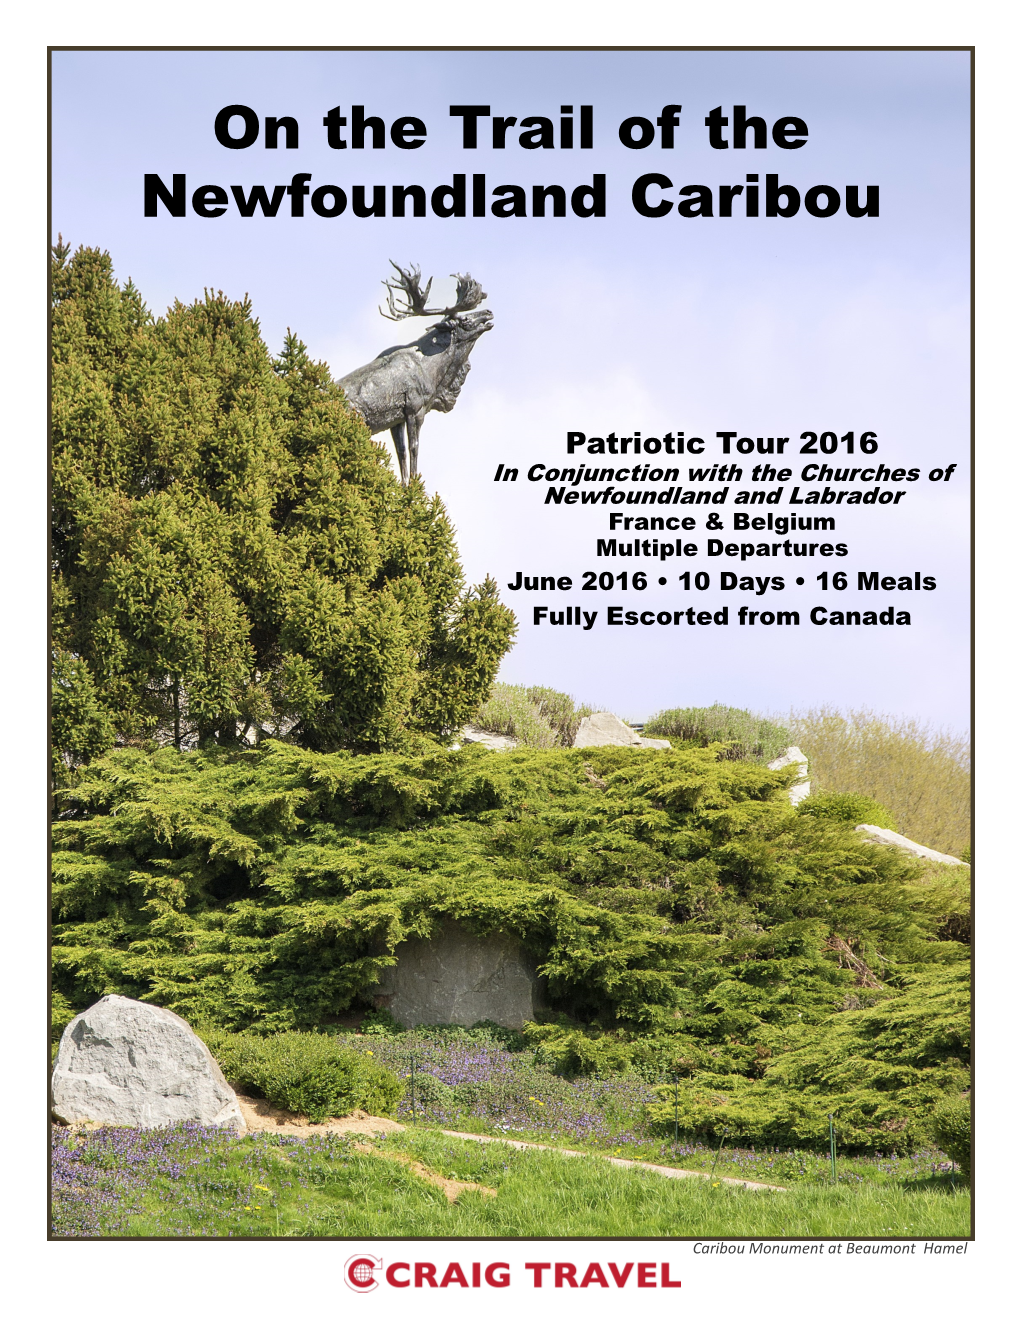 On the Trail of the Newfoundland Caribou